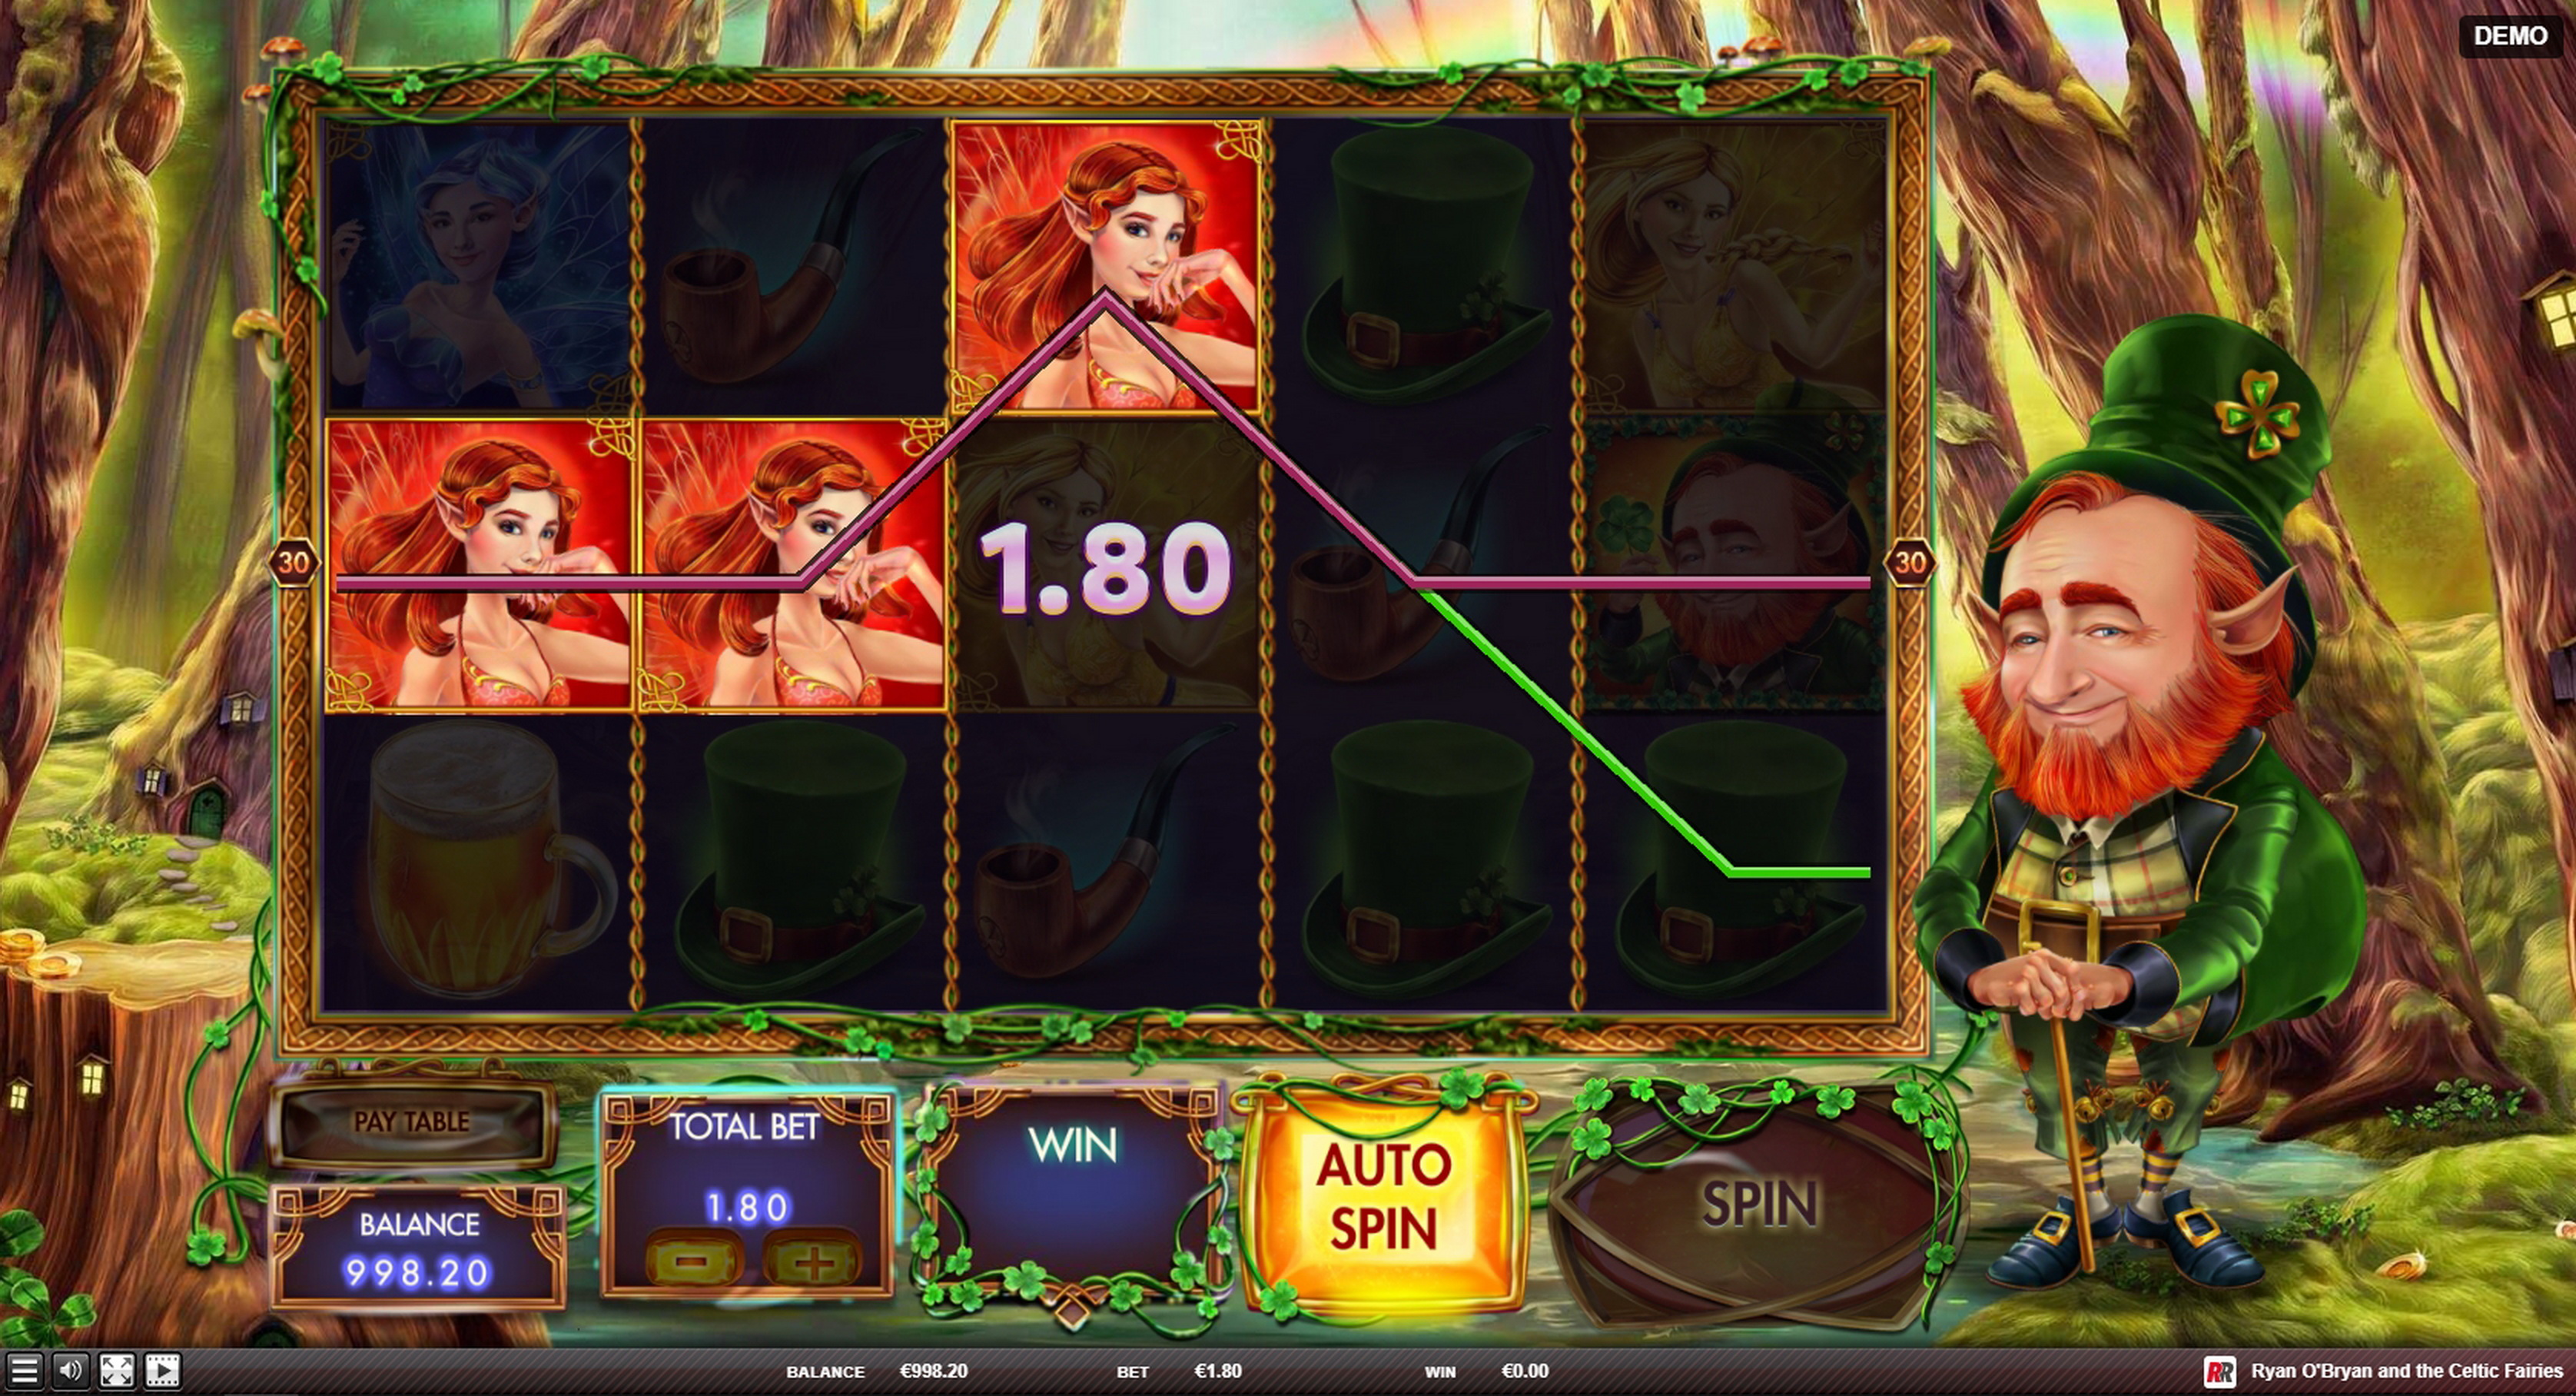 Win Money in Ryan O'Bryan and the Celtic Fairies Free Slot Game by Red Rake Gaming